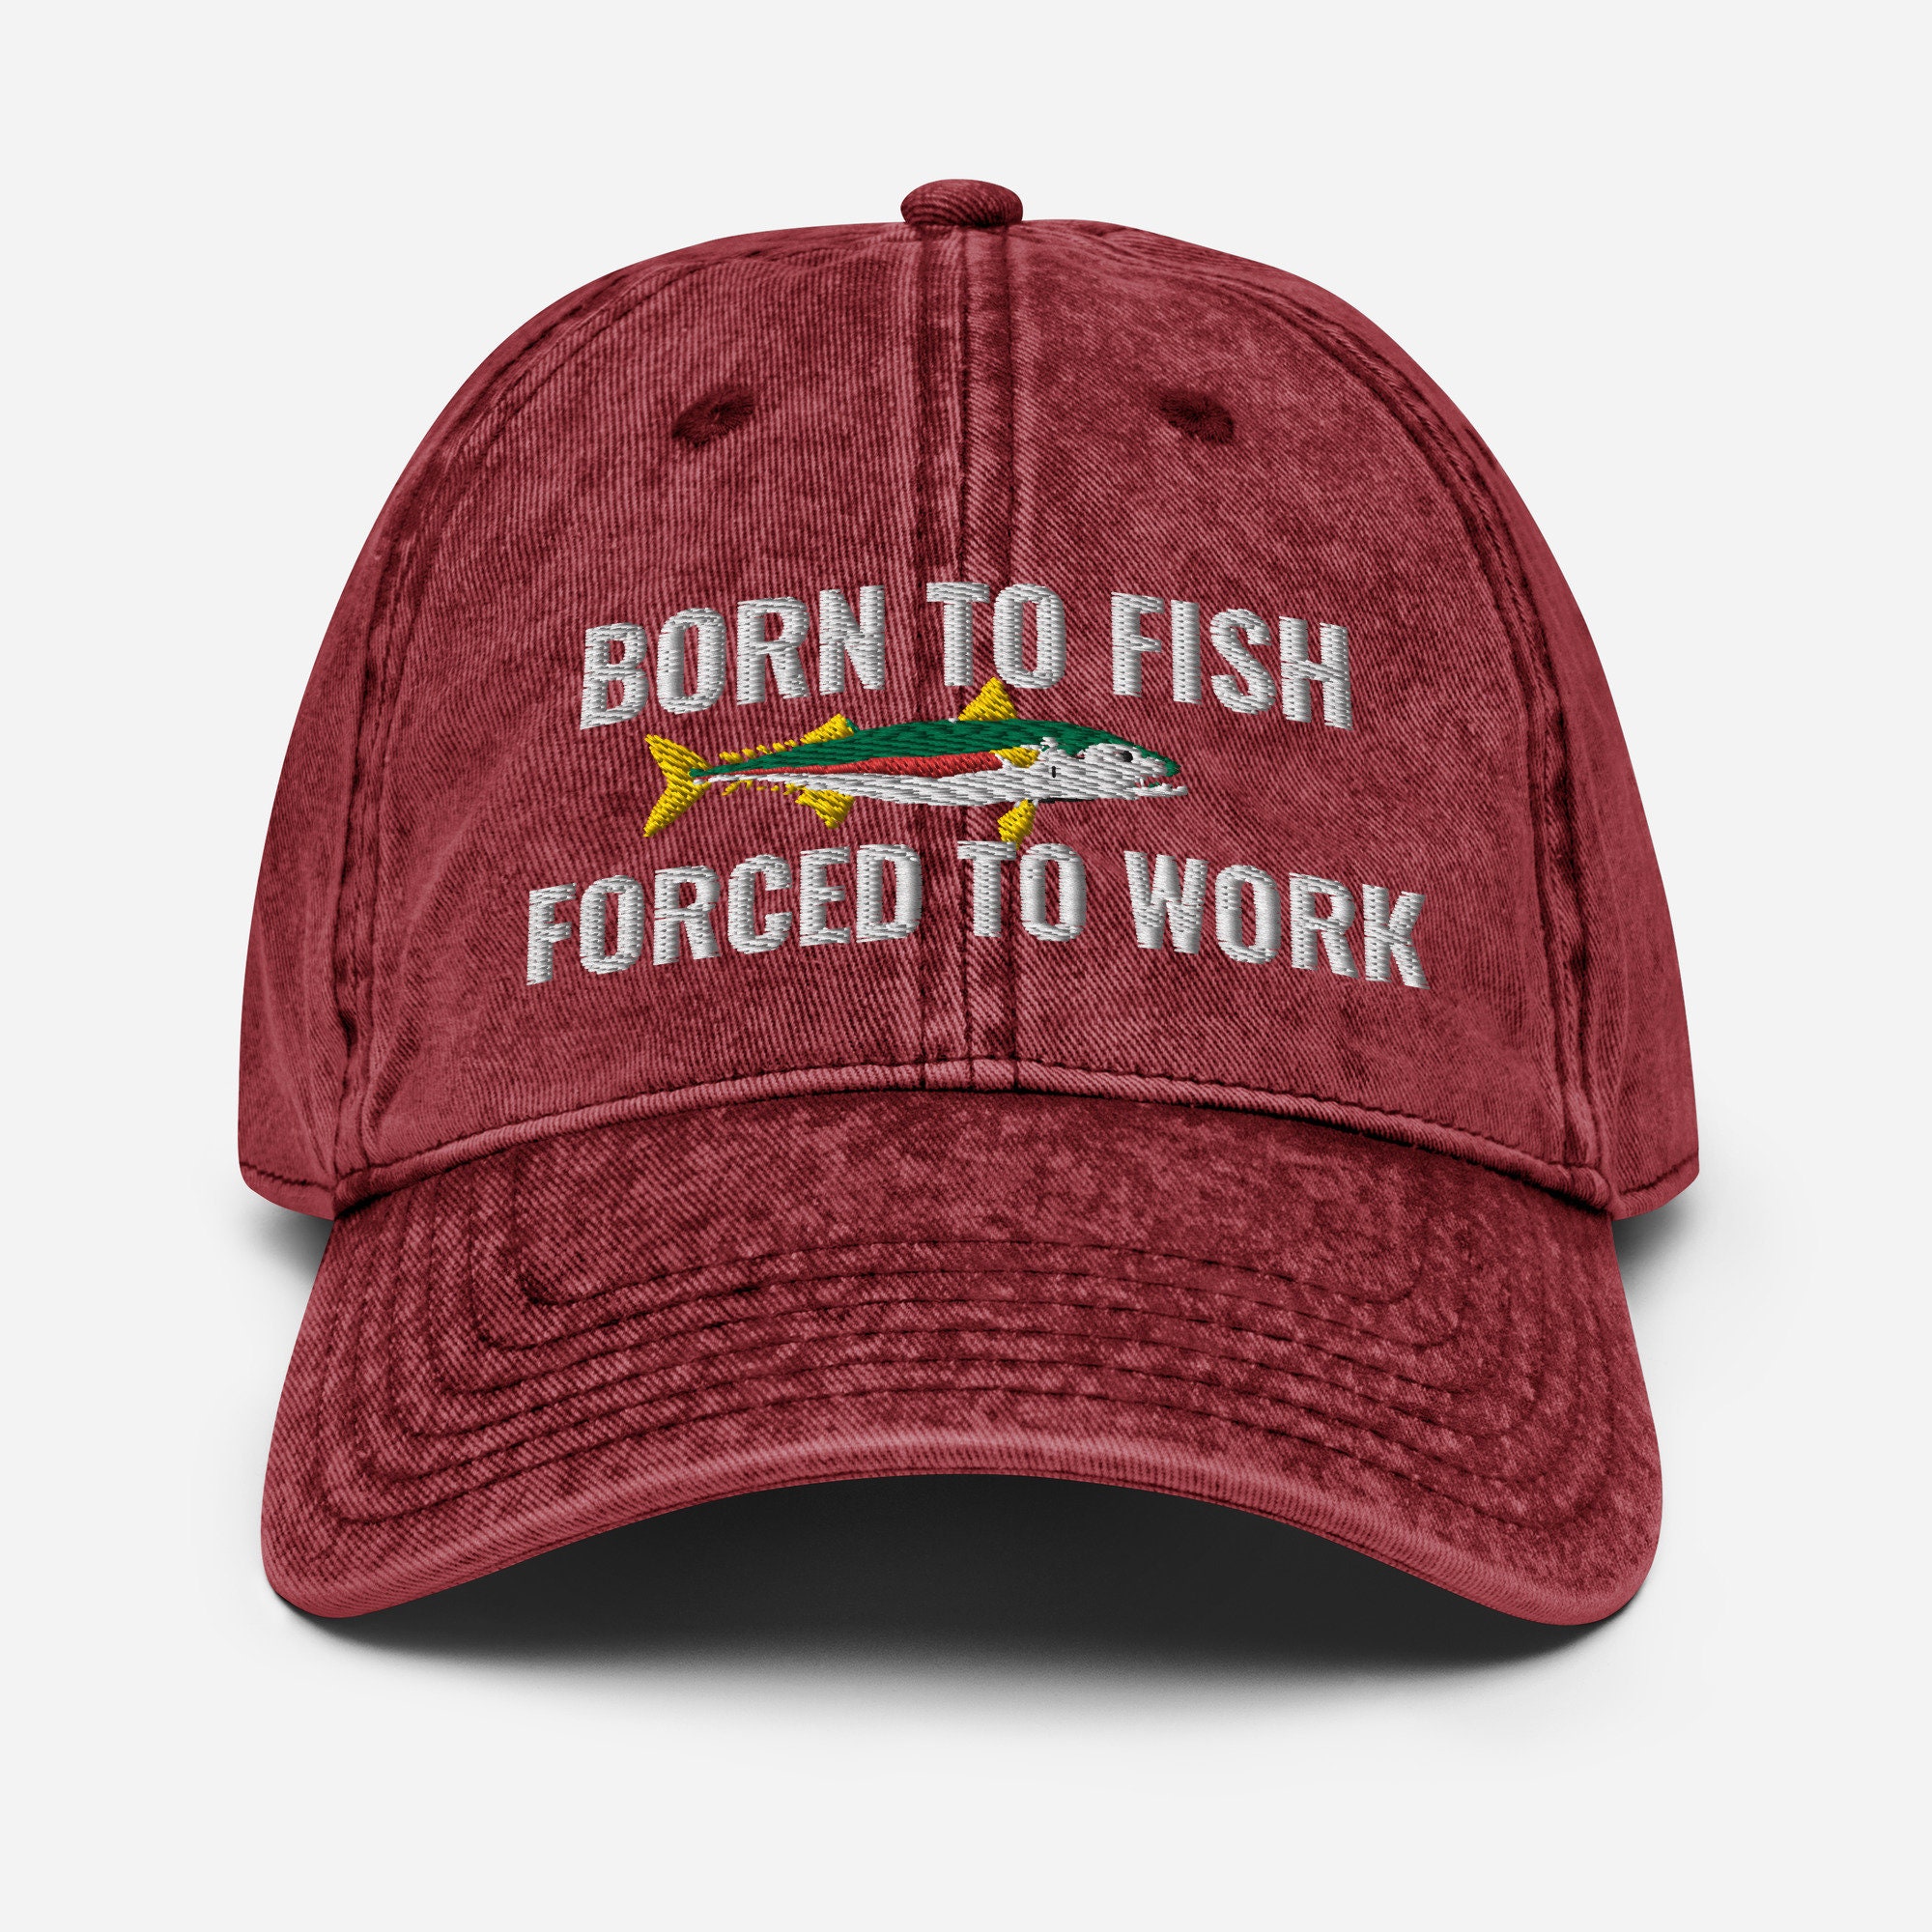 Vintage Fishing Hat // Fisherman Have Longer Poles and Stiffer Rods //  Funny Fishing Hat // Trucker Hat // Two Tone Snapback Fish Boating -   Canada